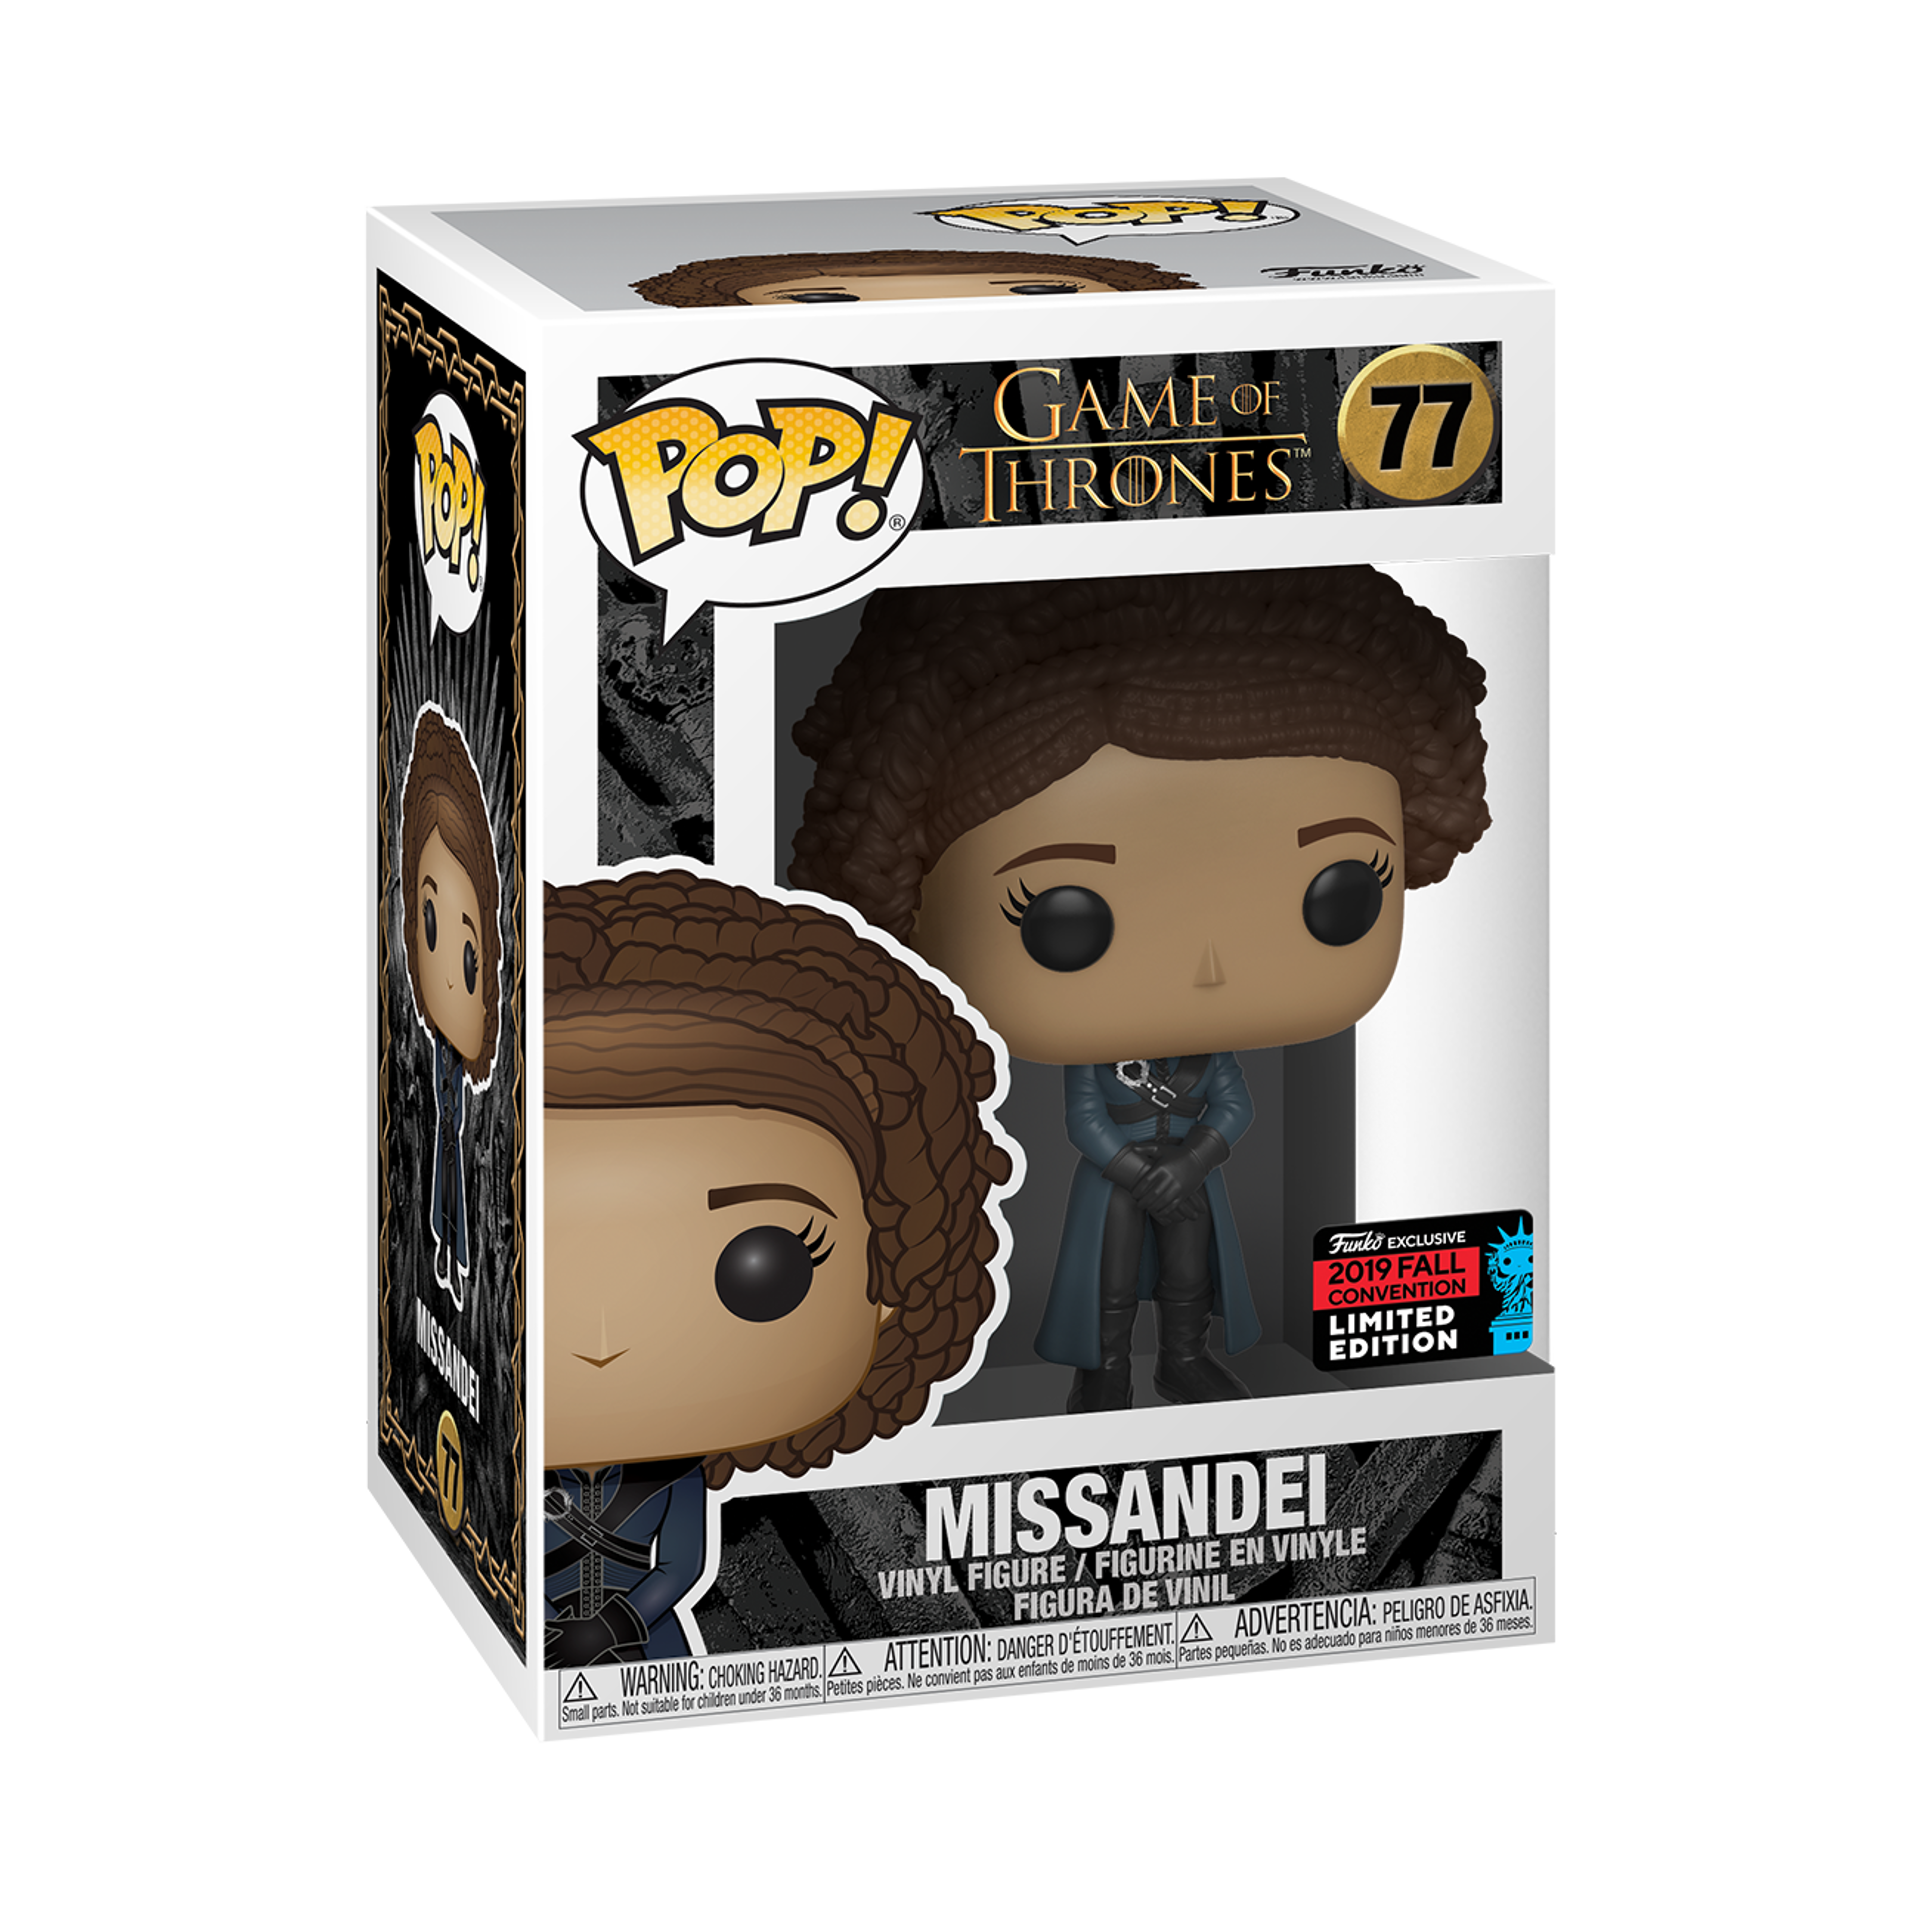 Funko Pop! Game of Thrones: Missandei - NYCC 2019 Fall Convention Limited Edition Exclusive